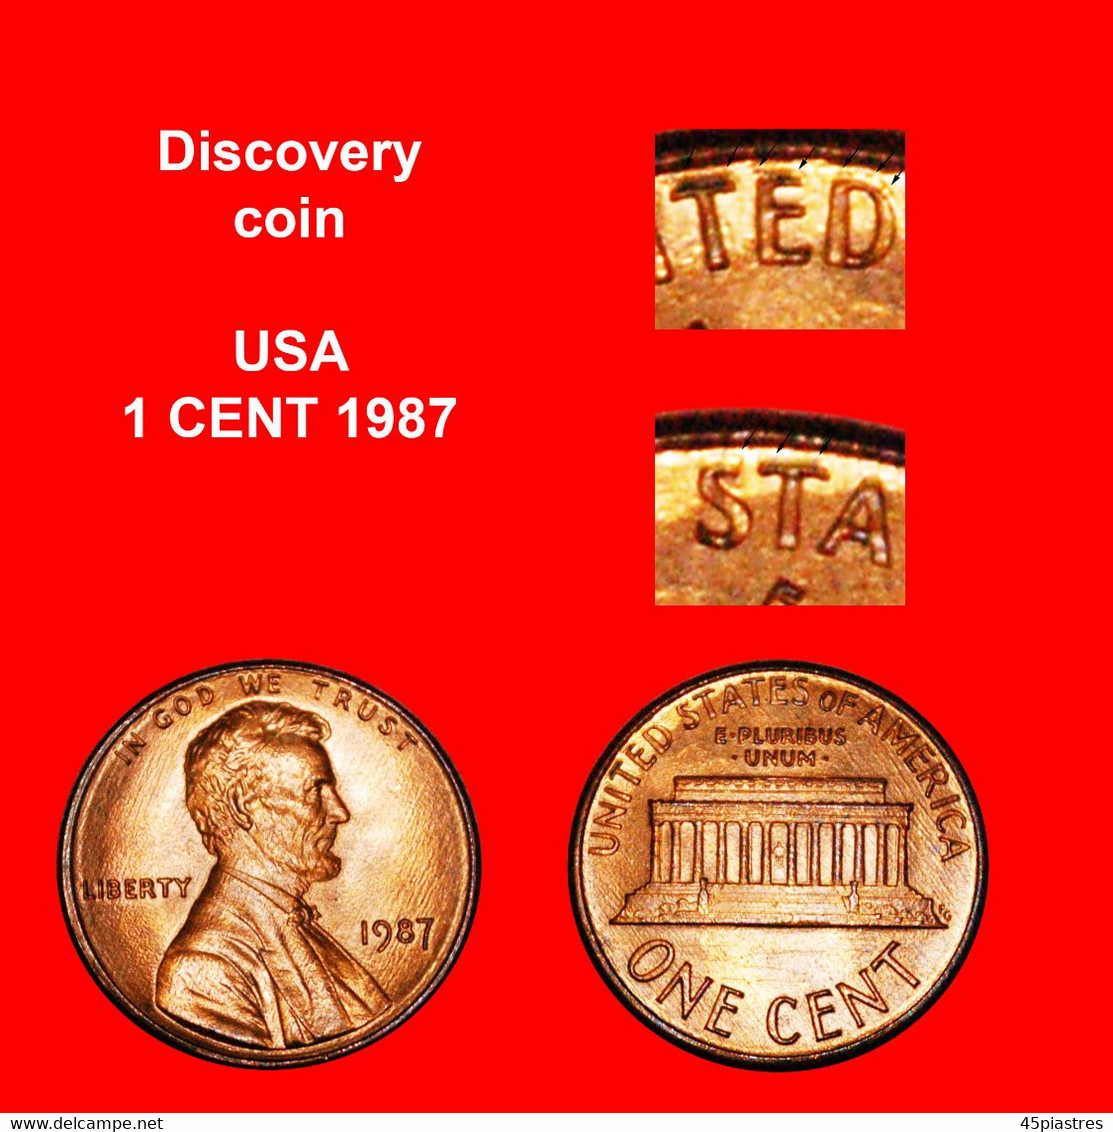 * MEMORIAL (1982-2008):USA1 CENT 1987 UNC MINT LUSTRE DISCOVERY COIN UNPUBLSIHEDLINCOLN 1809-1865LOW STARTNO RESERVE - Erreurs